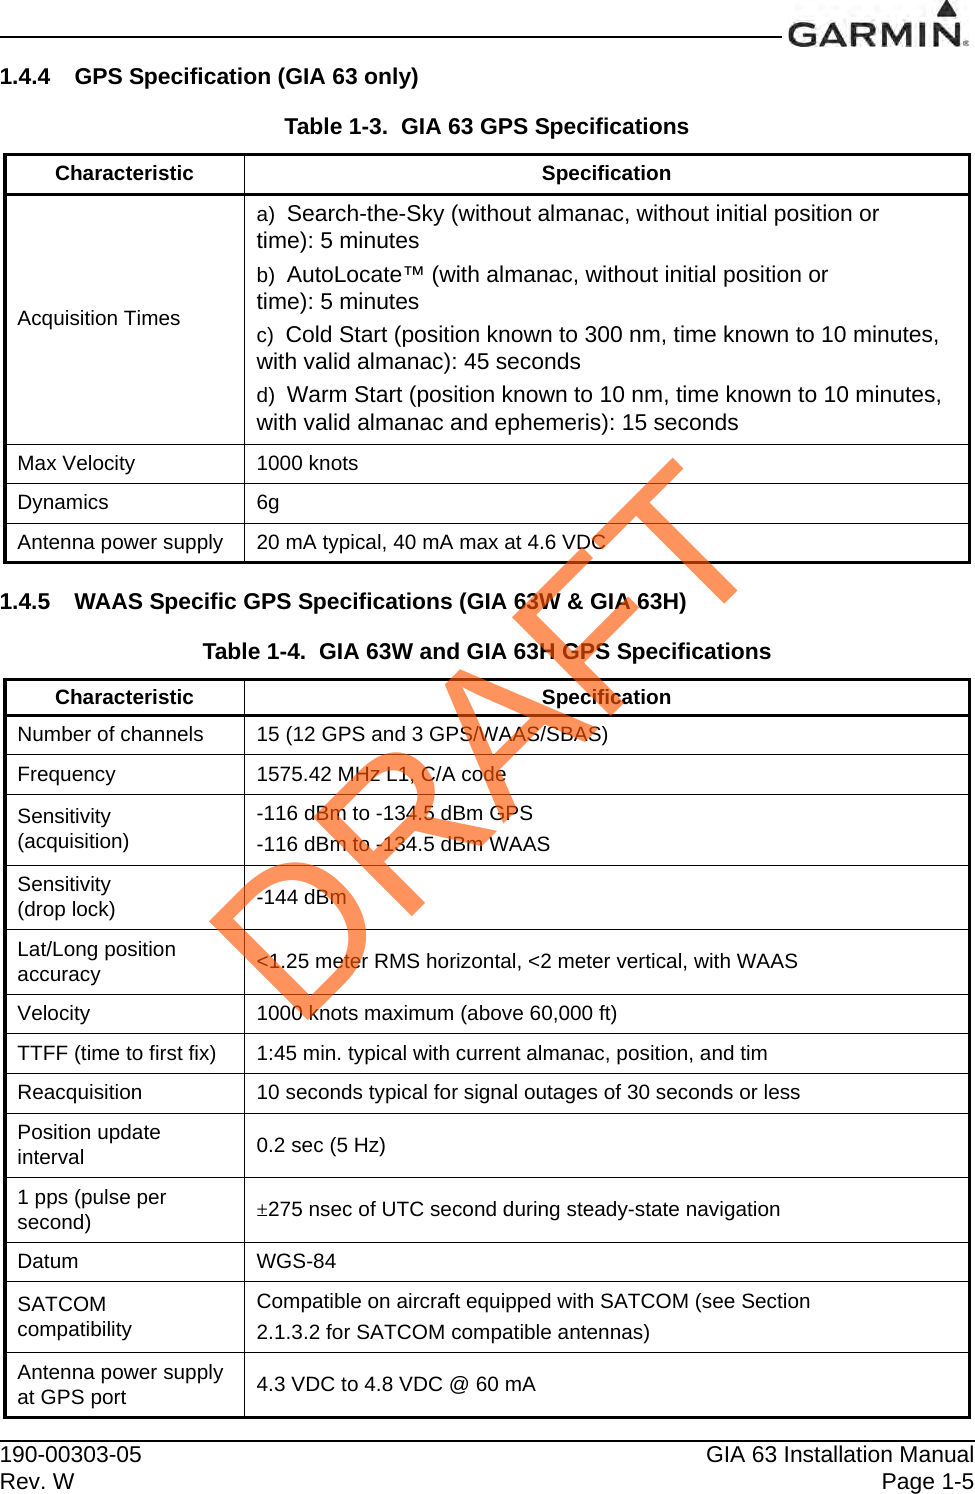 190-00303-05 GIA 63 Installation ManualRev. W Page 1-51.4.4 GPS Specification (GIA 63 only)1.4.5 WAAS Specific GPS Specifications (GIA 63W &amp; GIA 63H)Table 1-3.  GIA 63 GPS SpecificationsCharacteristic SpecificationAcquisition Timesa)  Search-the-Sky (without almanac, without initial position or time): 5 minutesb)  AutoLocate™ (with almanac, without initial position or time): 5 minutesc)  Cold Start (position known to 300 nm, time known to 10 minutes, with valid almanac): 45 secondsd)  Warm Start (position known to 10 nm, time known to 10 minutes, with valid almanac and ephemeris): 15 secondsMax Velocity 1000 knotsDynamics 6gAntenna power supply 20 mA typical, 40 mA max at 4.6 VDCTable 1-4.  GIA 63W and GIA 63H GPS SpecificationsCharacteristic SpecificationNumber of channels 15 (12 GPS and 3 GPS/WAAS/SBAS)Frequency 1575.42 MHz L1, C/A codeSensitivity (acquisition)-116 dBm to -134.5 dBm GPS-116 dBm to -134.5 dBm WAASSensitivity (drop lock) -144 dBmLat/Long position accuracy &lt;1.25 meter RMS horizontal, &lt;2 meter vertical, with WAASVelocity 1000 knots maximum (above 60,000 ft)TTFF (time to first fix) 1:45 min. typical with current almanac, position, and timReacquisition 10 seconds typical for signal outages of 30 seconds or lessPosition update interval 0.2 sec (5 Hz)1 pps (pulse per second) ±275 nsec of UTC second during steady-state navigationDatum WGS-84SATCOM compatibilityCompatible on aircraft equipped with SATCOM (see Section2.1.3.2 for SATCOM compatible antennas)Antenna power supply at GPS port 4.3 VDC to 4.8 VDC @ 60 mADRAFT